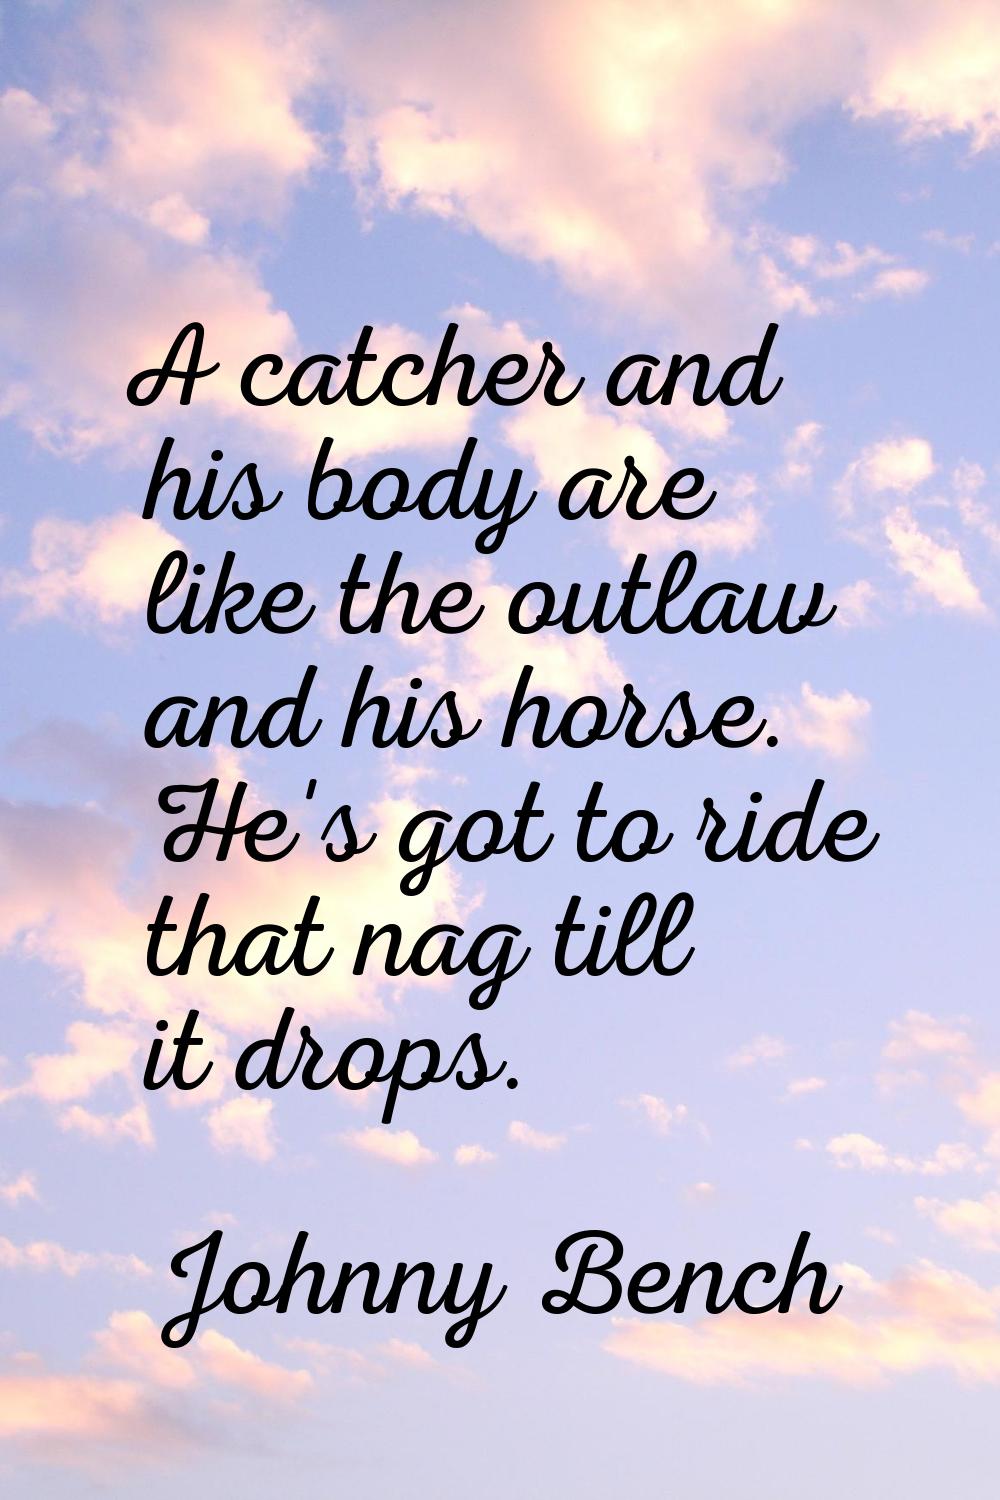 A catcher and his body are like the outlaw and his horse. He's got to ride that nag till it drops.